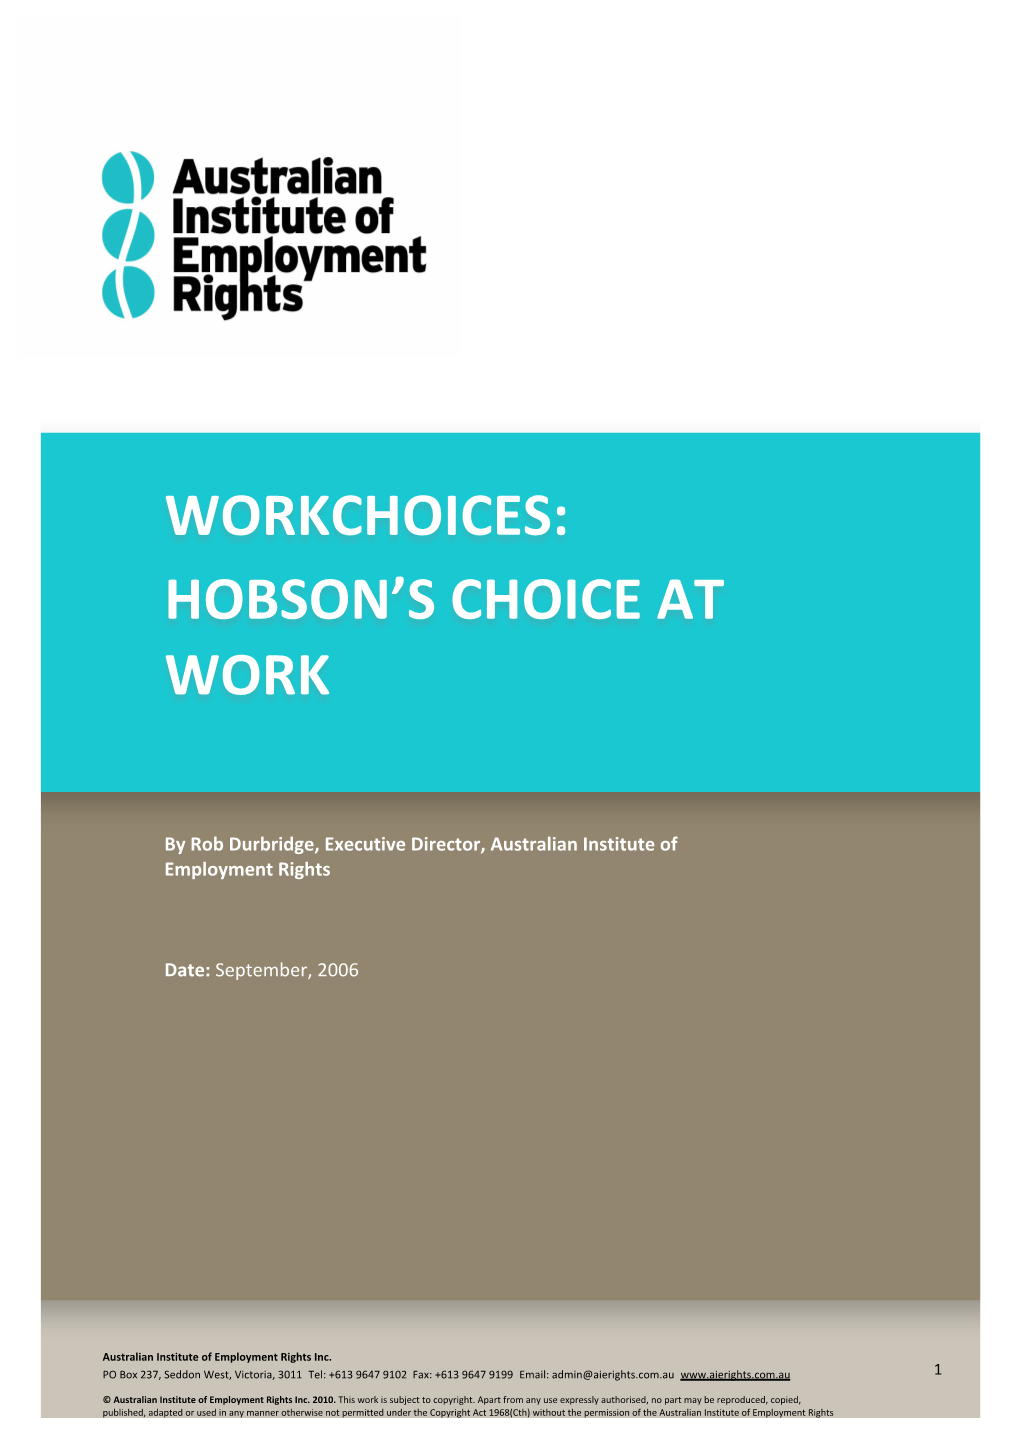 Workchoices: Hobson's Choice at Work